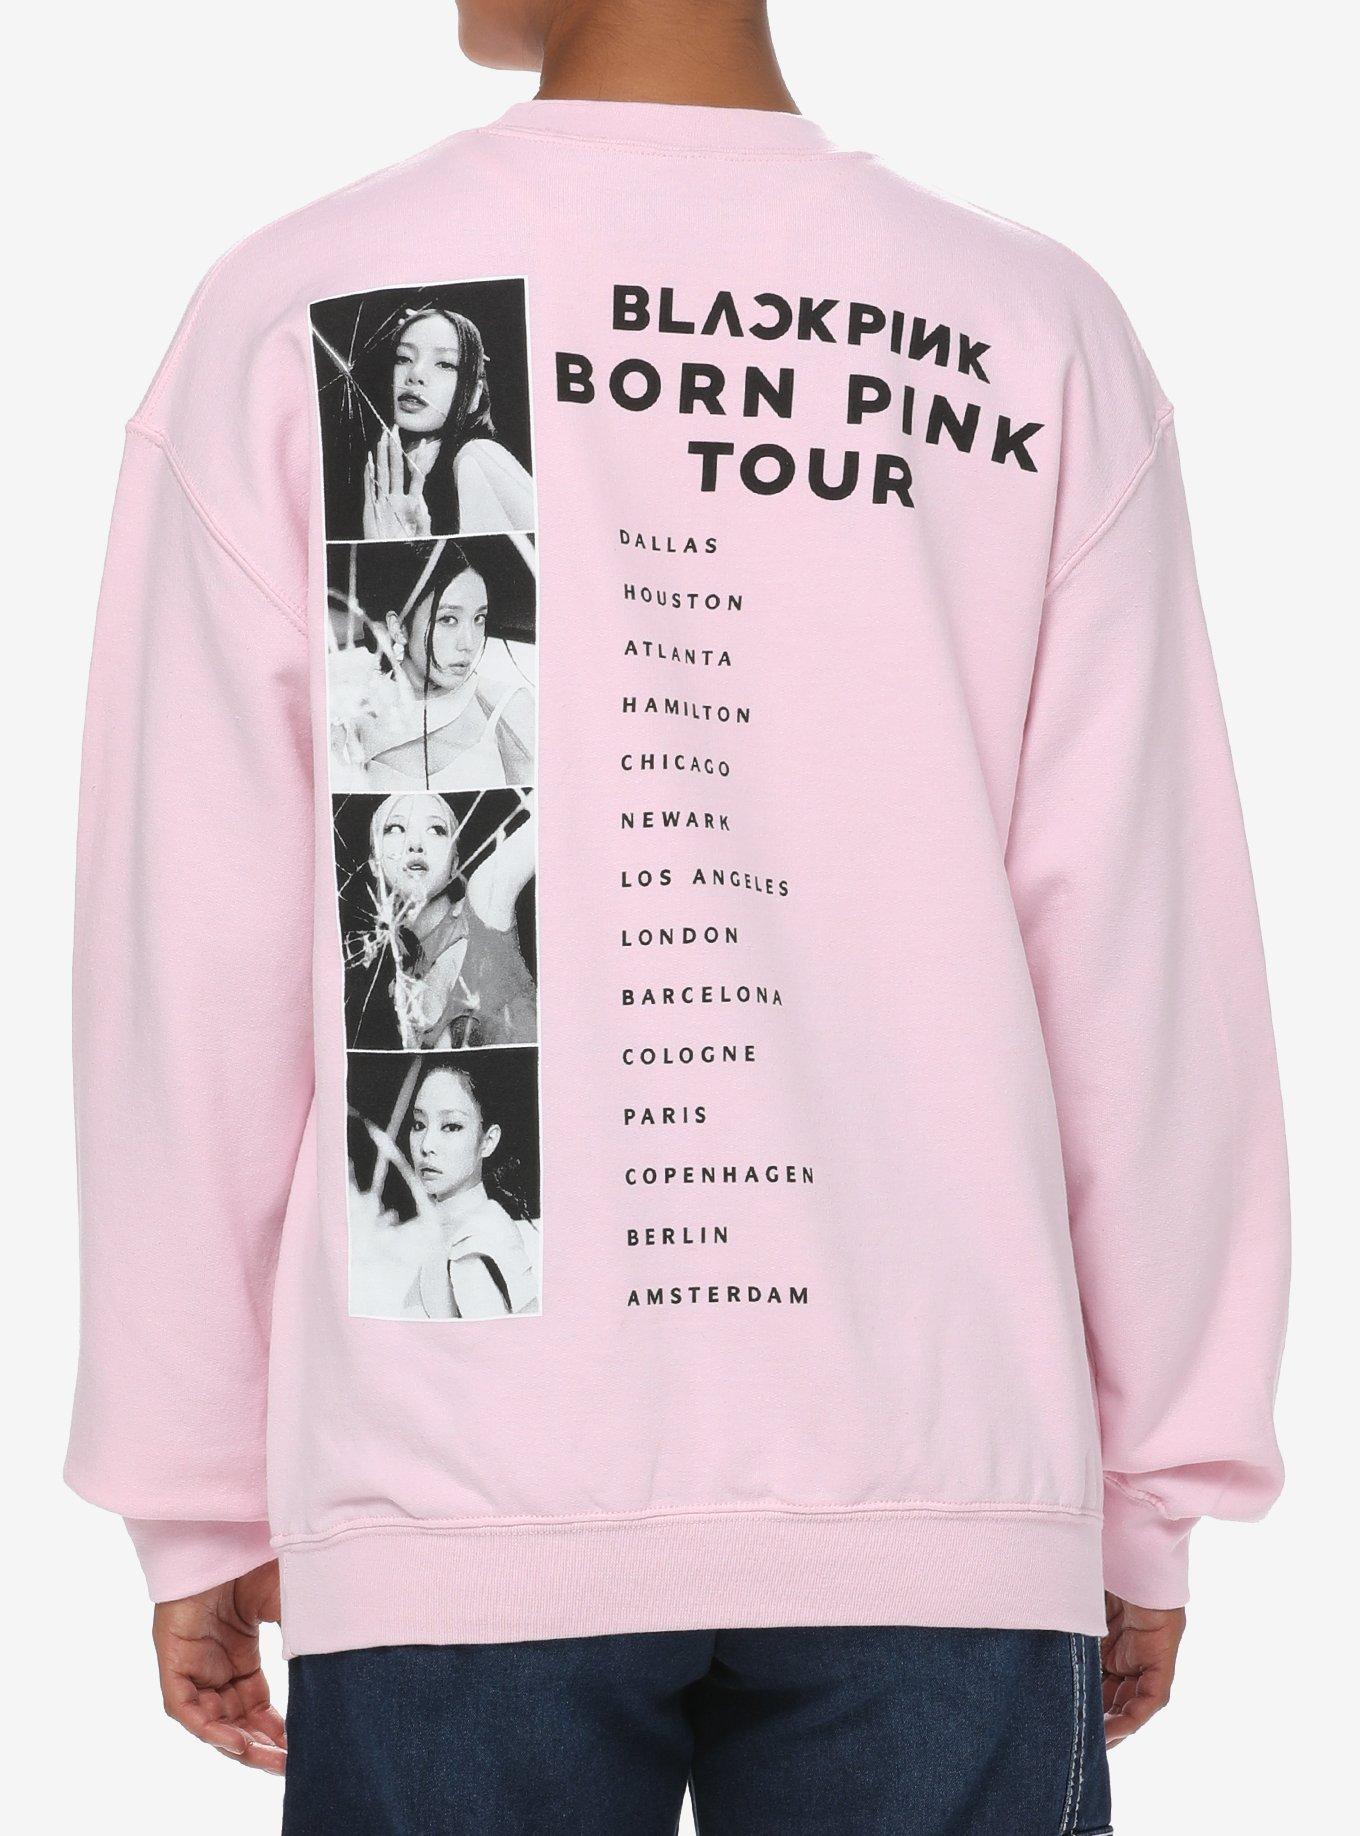 BLACKPINK WORLD TOUR: BLACKPINK in your area! K-pop girl group returning  with new studio album, world tour - The Economic Times